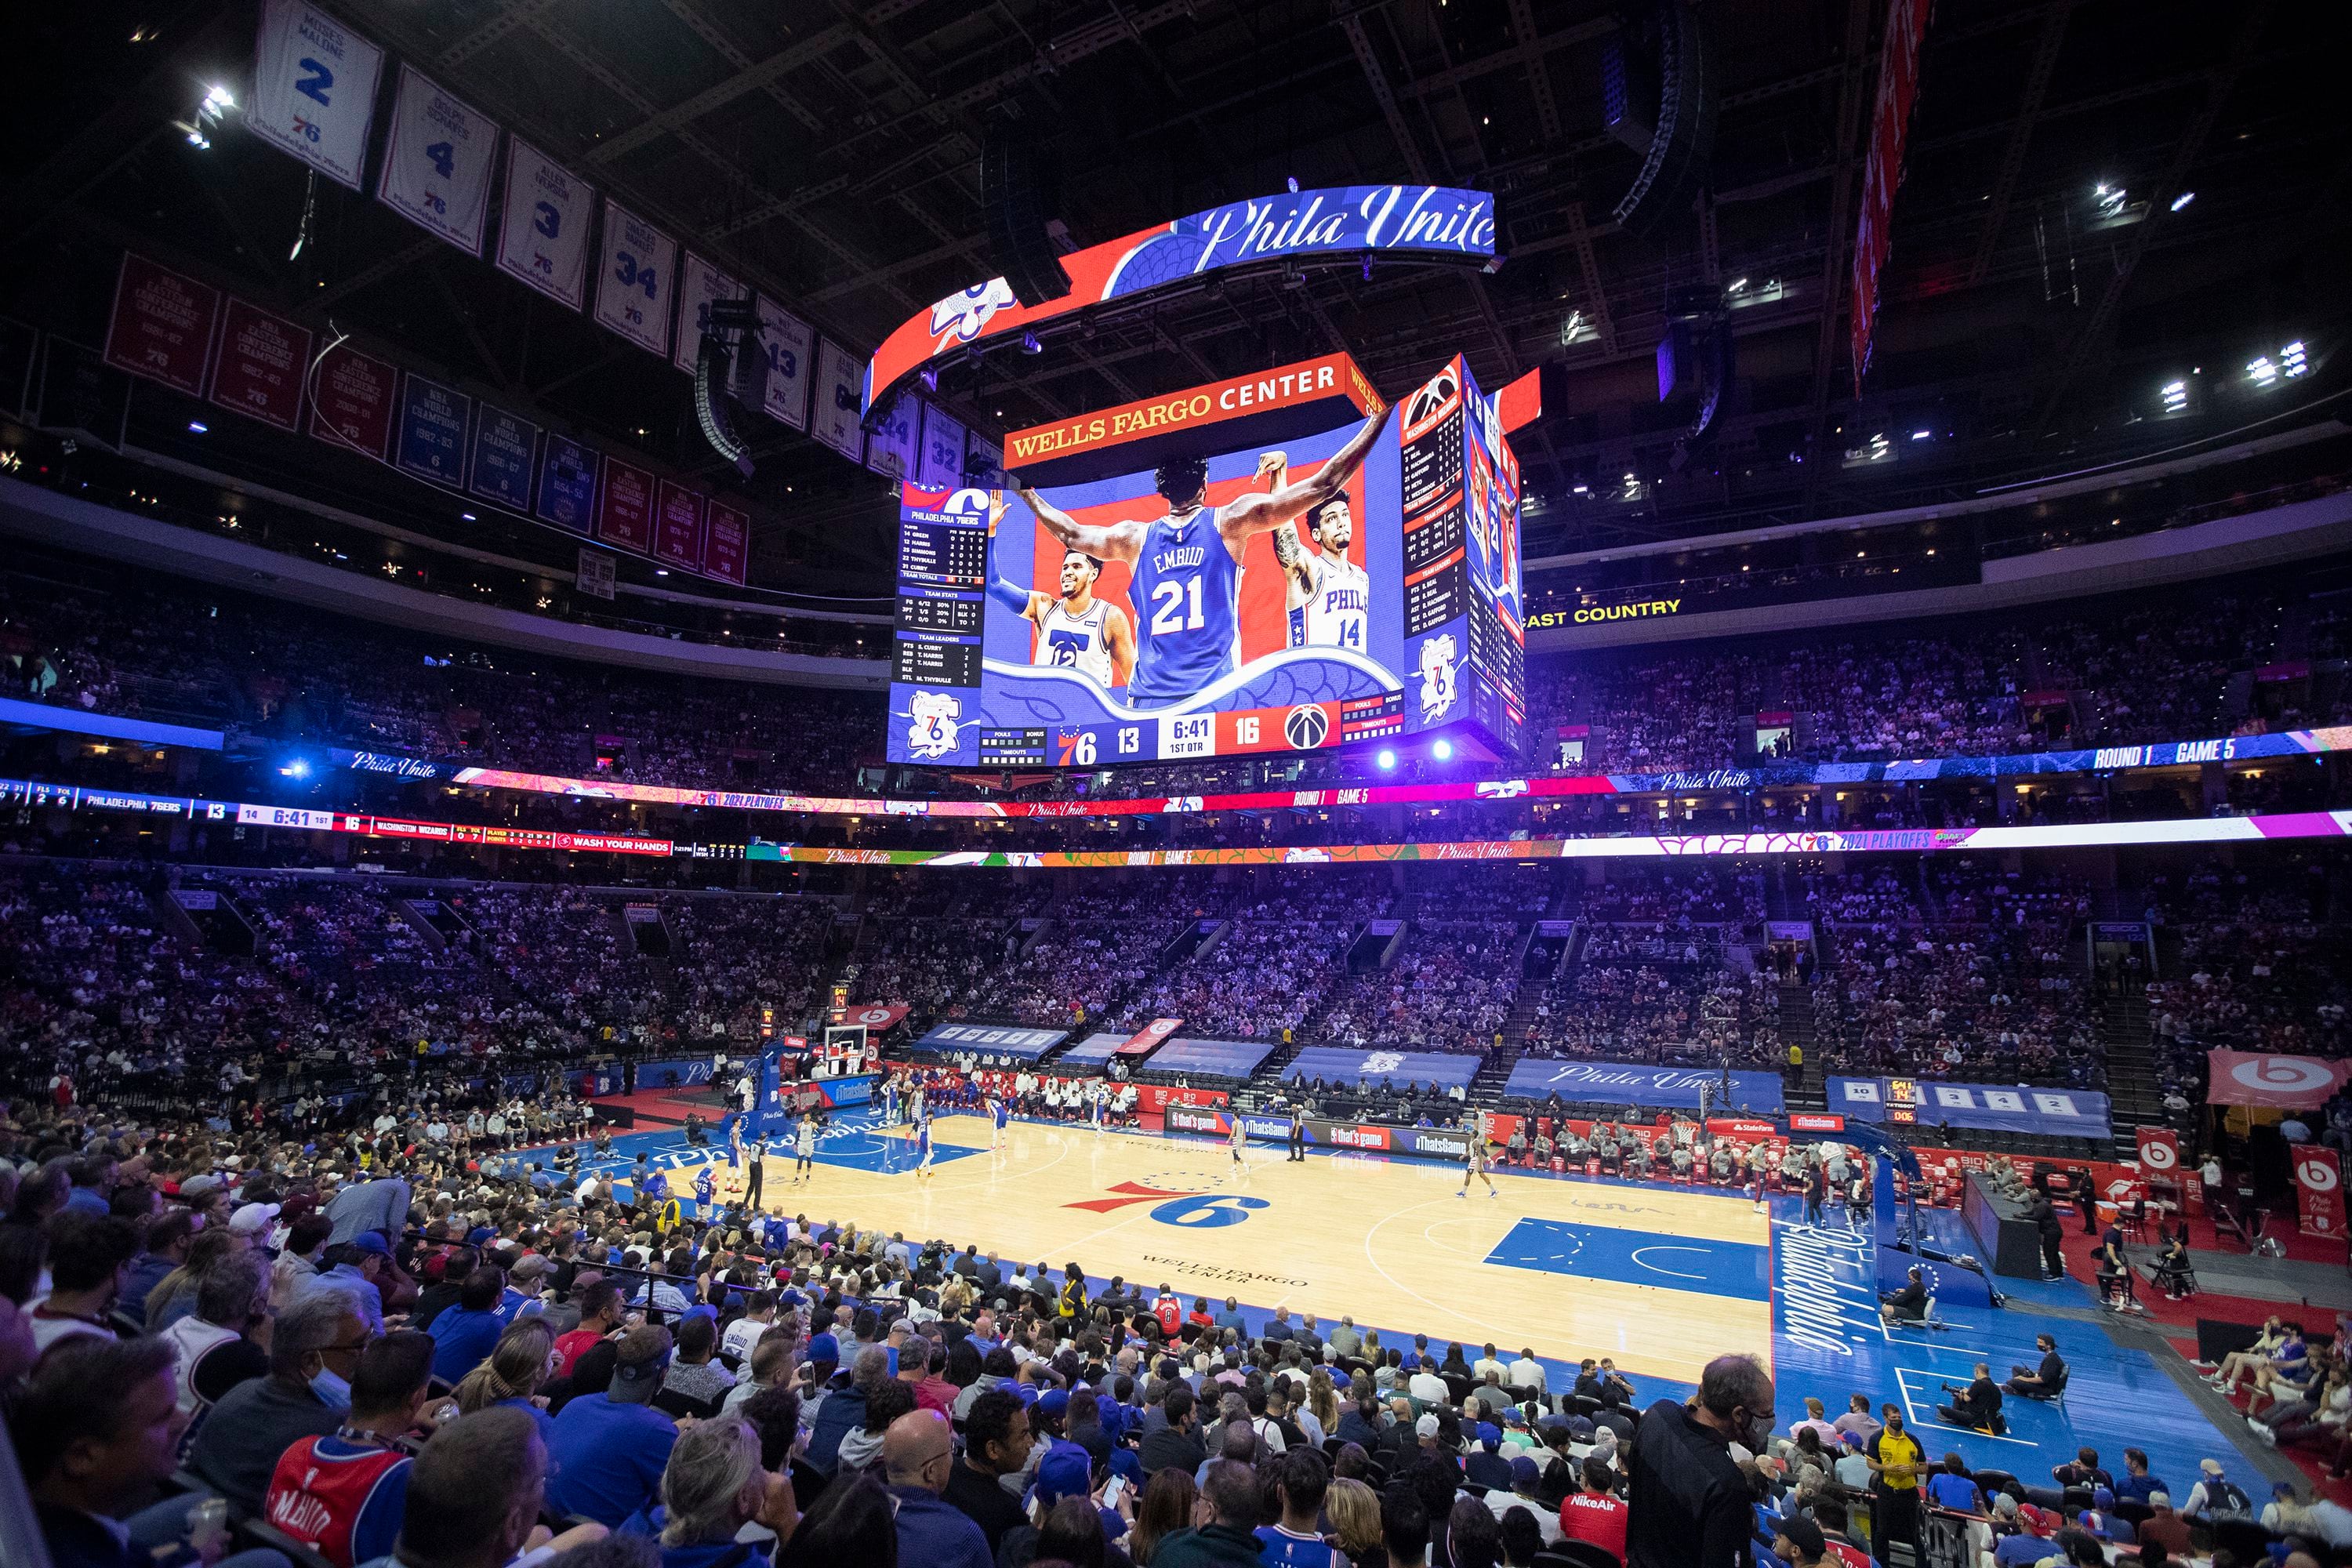 Sixers Run a Full-Page Inquirer Ad to Promote Arena Project - Crossing Broad